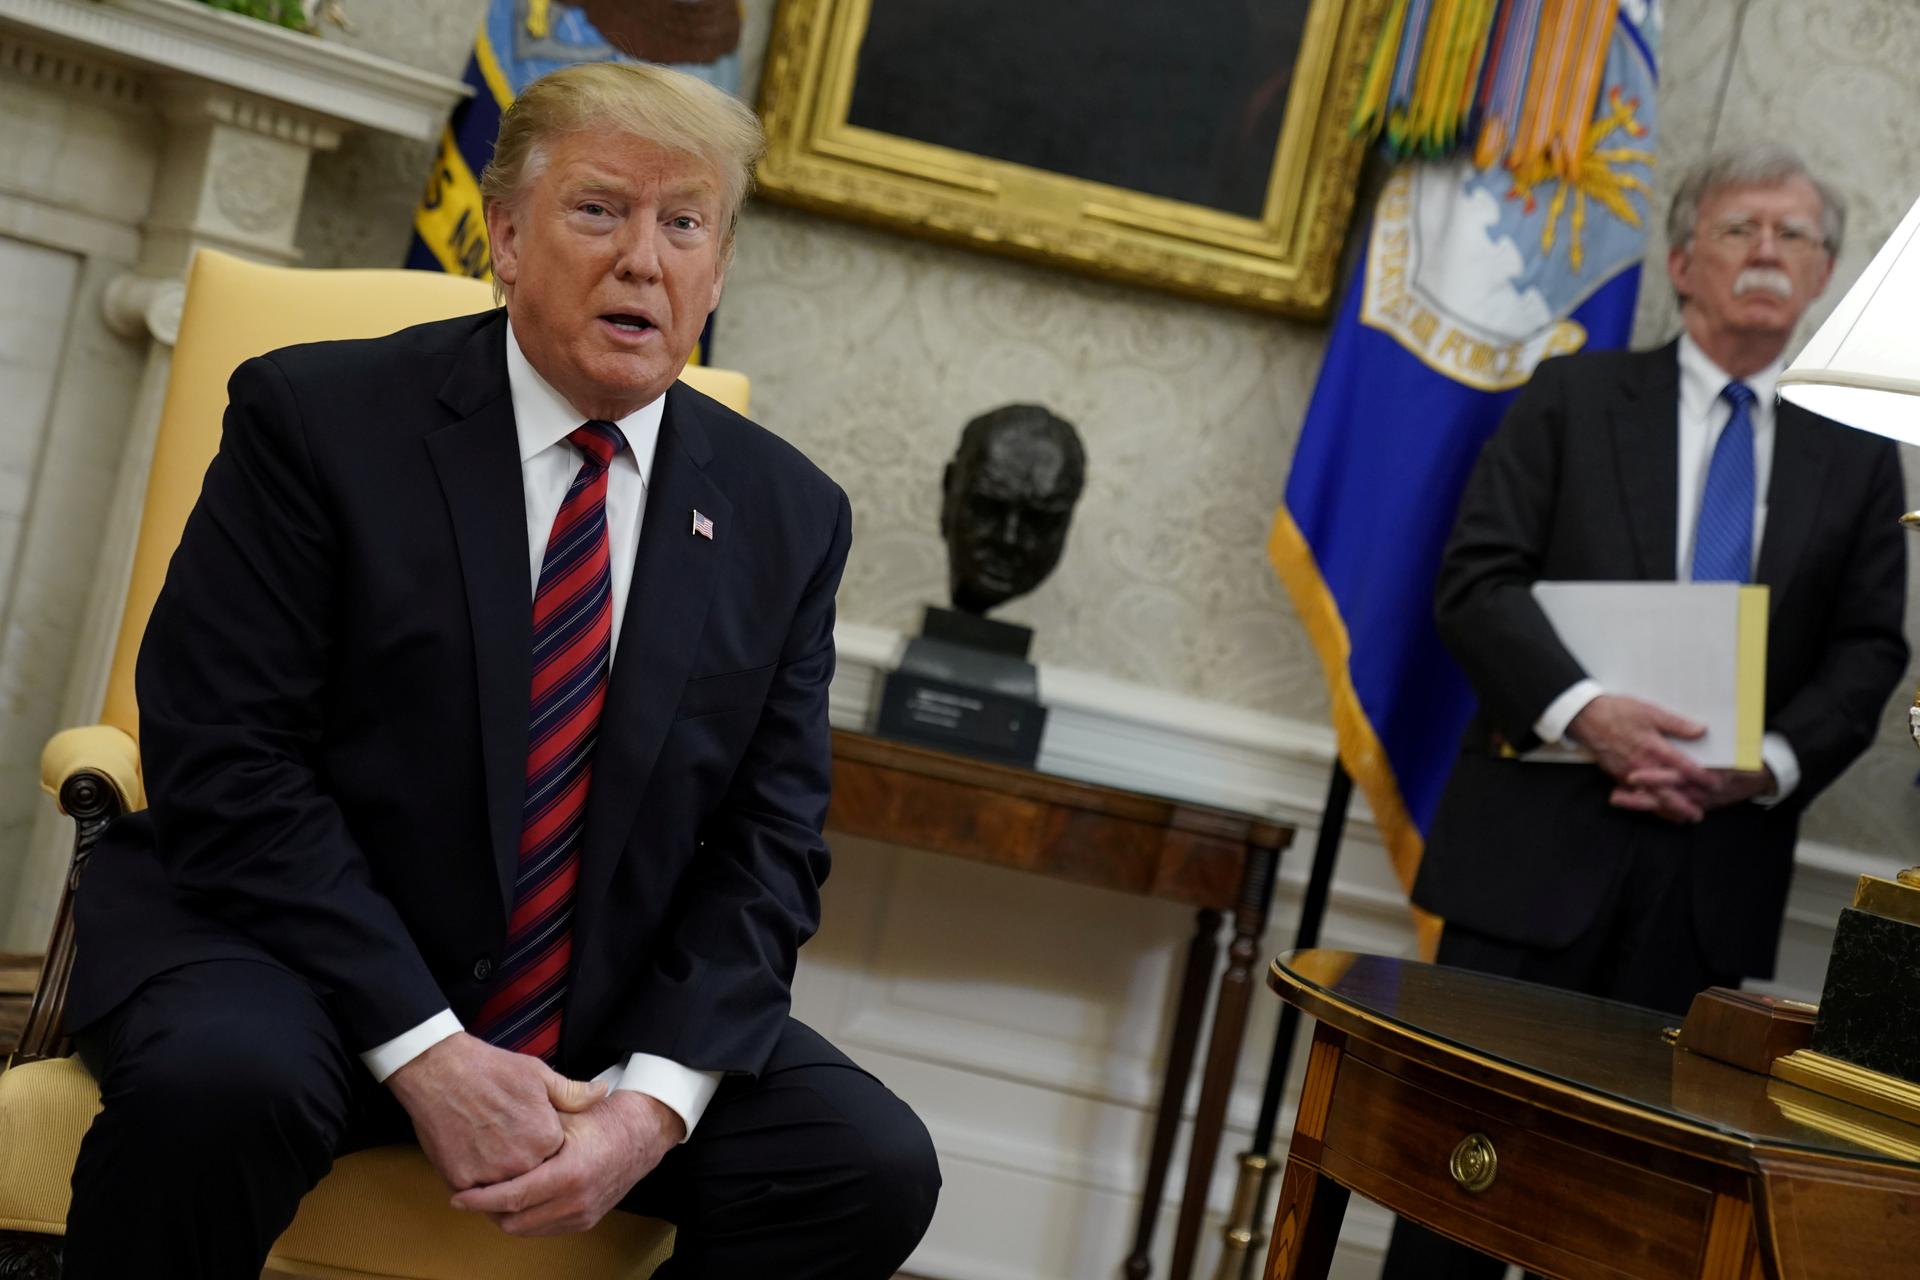 US President Donald Trump speaks to reporters with National Security Adviser John Bolton looking on in the Oval Office at the White House